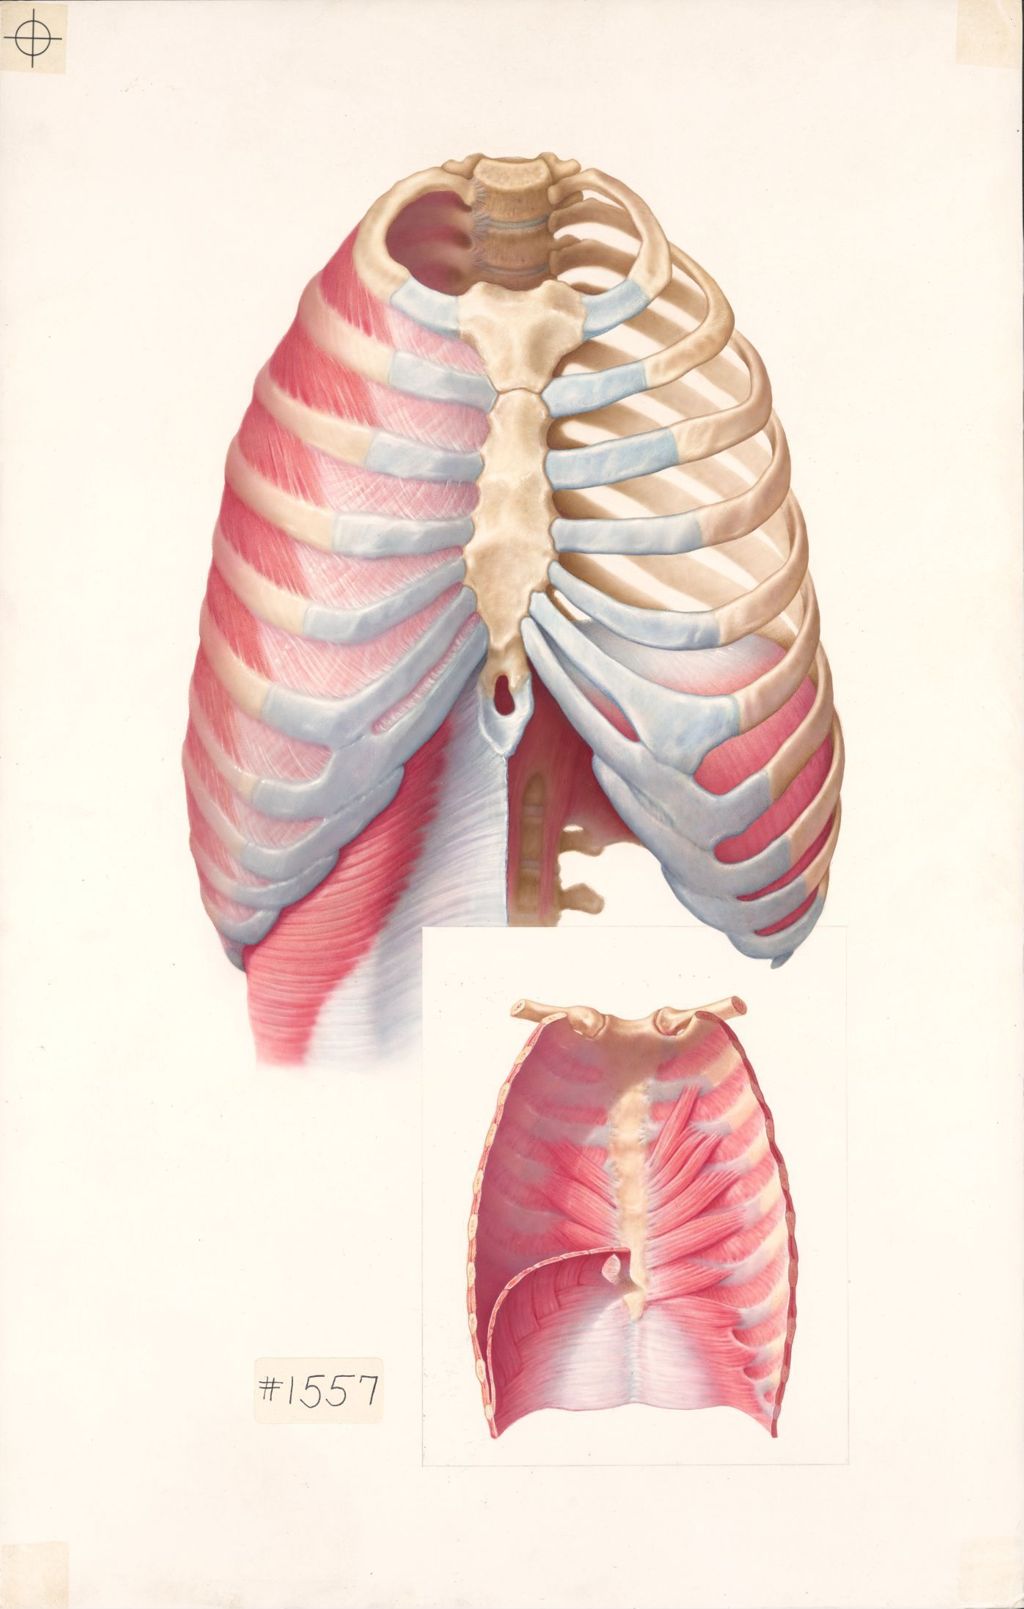 Miniature of Medical Profiles, Plate I, The Anatomical Disposition of the Thorax, The Thoracic Walls Anterior Aspect